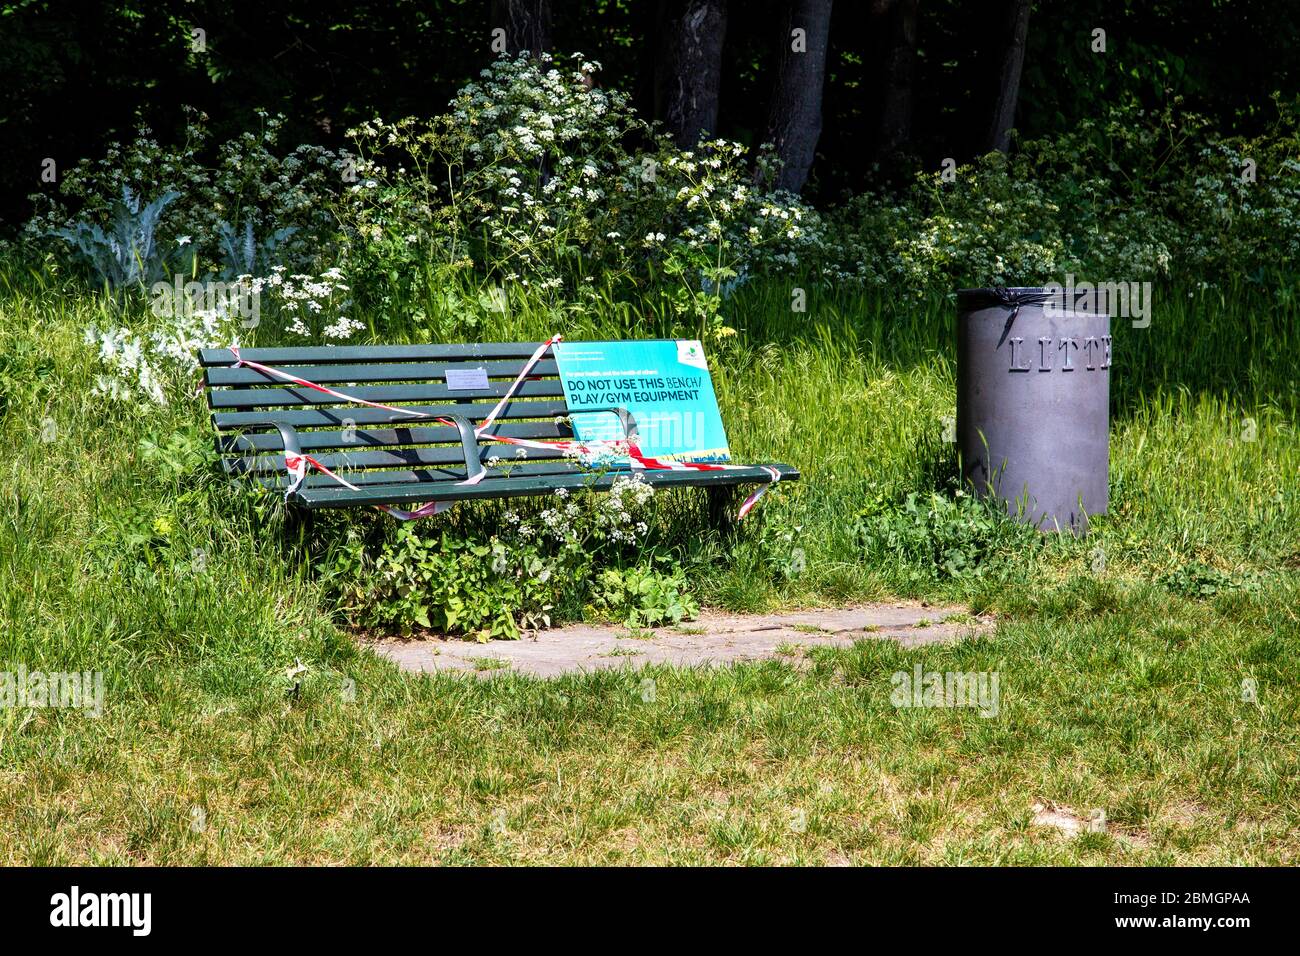 9th May 2020, London, UK - Bench taped over due to government restrictions to prevent people from using it during the Coronavirus outbreak lockdown at Tower Hamlets Cemetery Park, sign saying 'Do Not Use this Bench / Play / Gym Equipment' Stock Photo